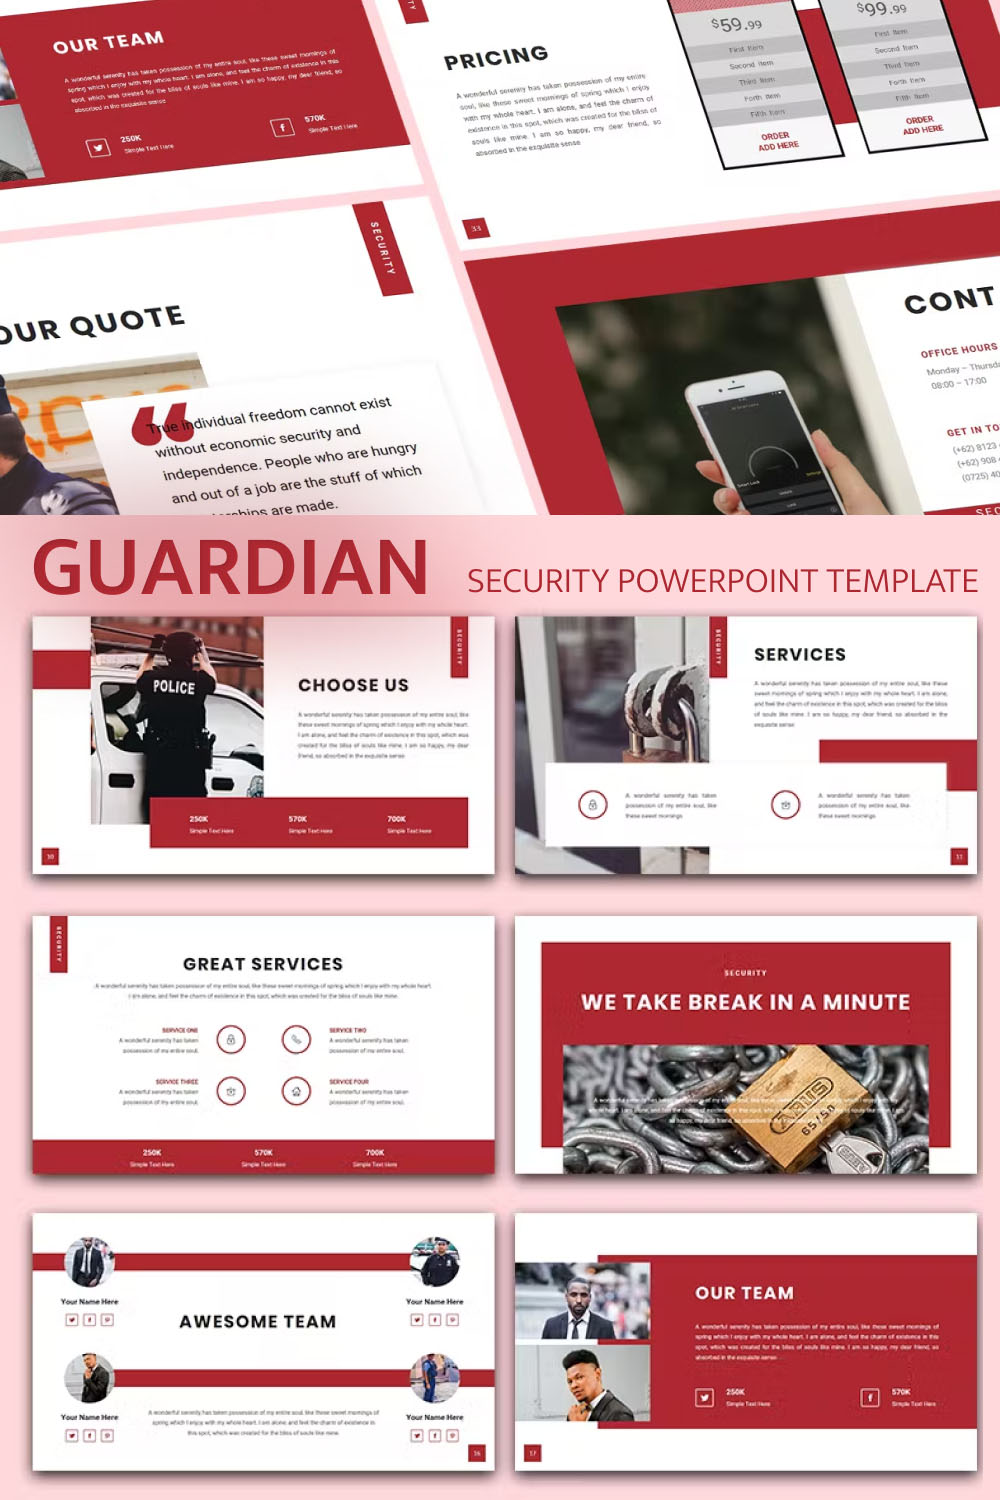 Guardian security powerpoint template of pinterest.